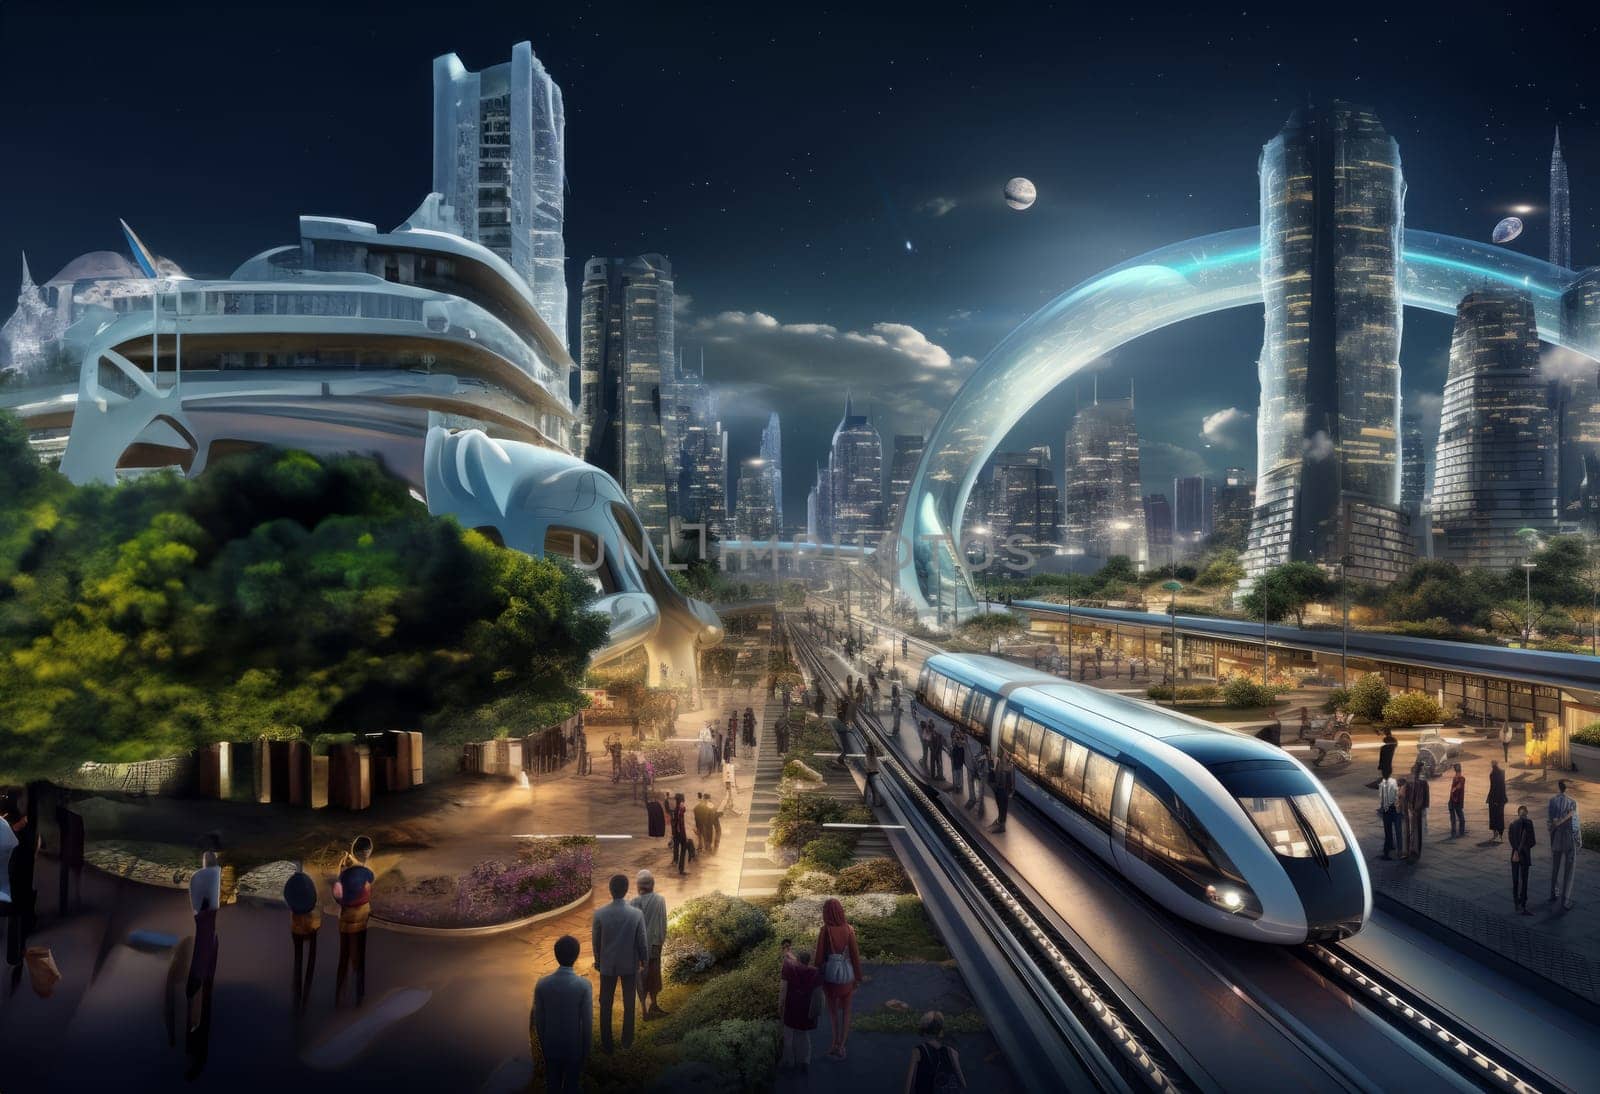 A representation of a futuristic city with modern trains, futuristic streets and cities.Generated image by dotshock